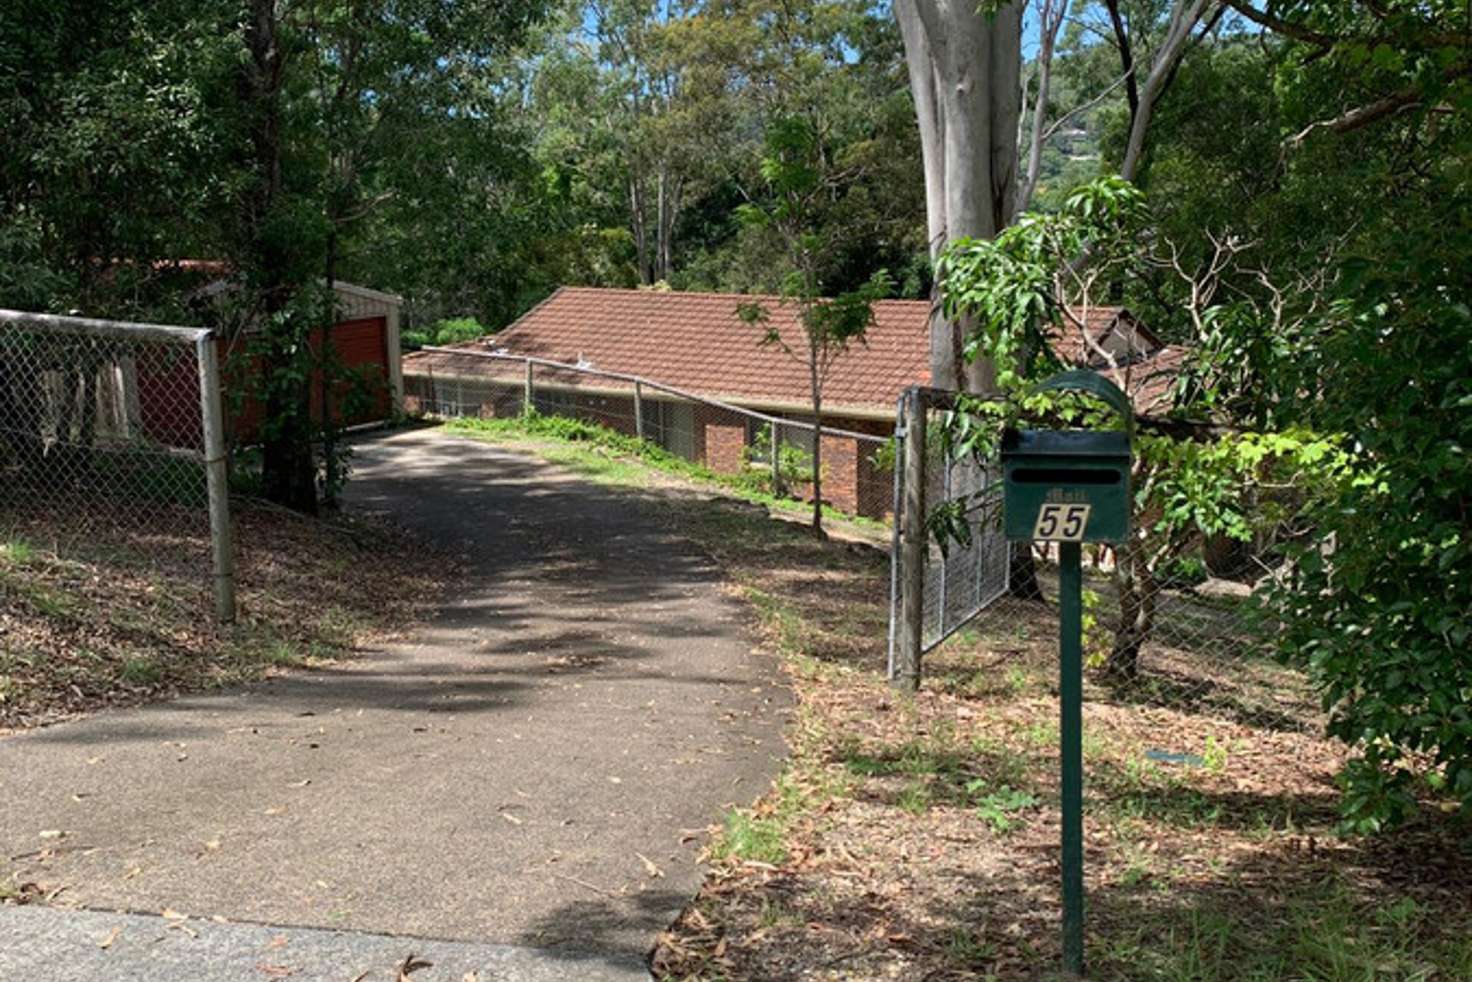 Main view of Homely house listing, 55 Trees Road, Tallebudgera QLD 4228